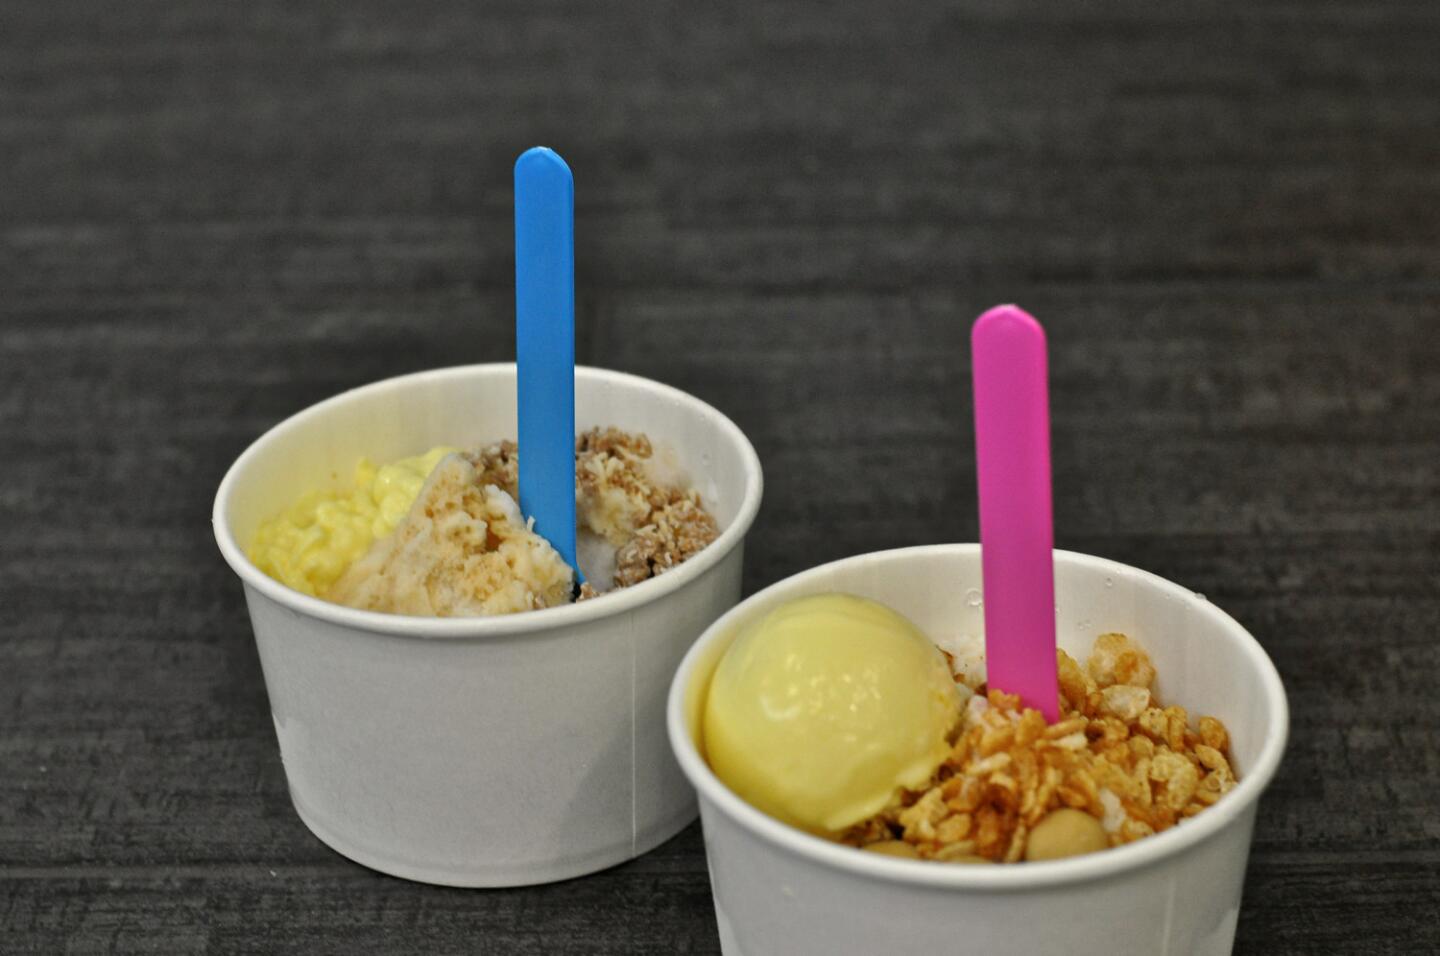 Two of Ice Que's "oma-QUE-se" offerings: the Horchata and the Milk & Honey shave ice cups.